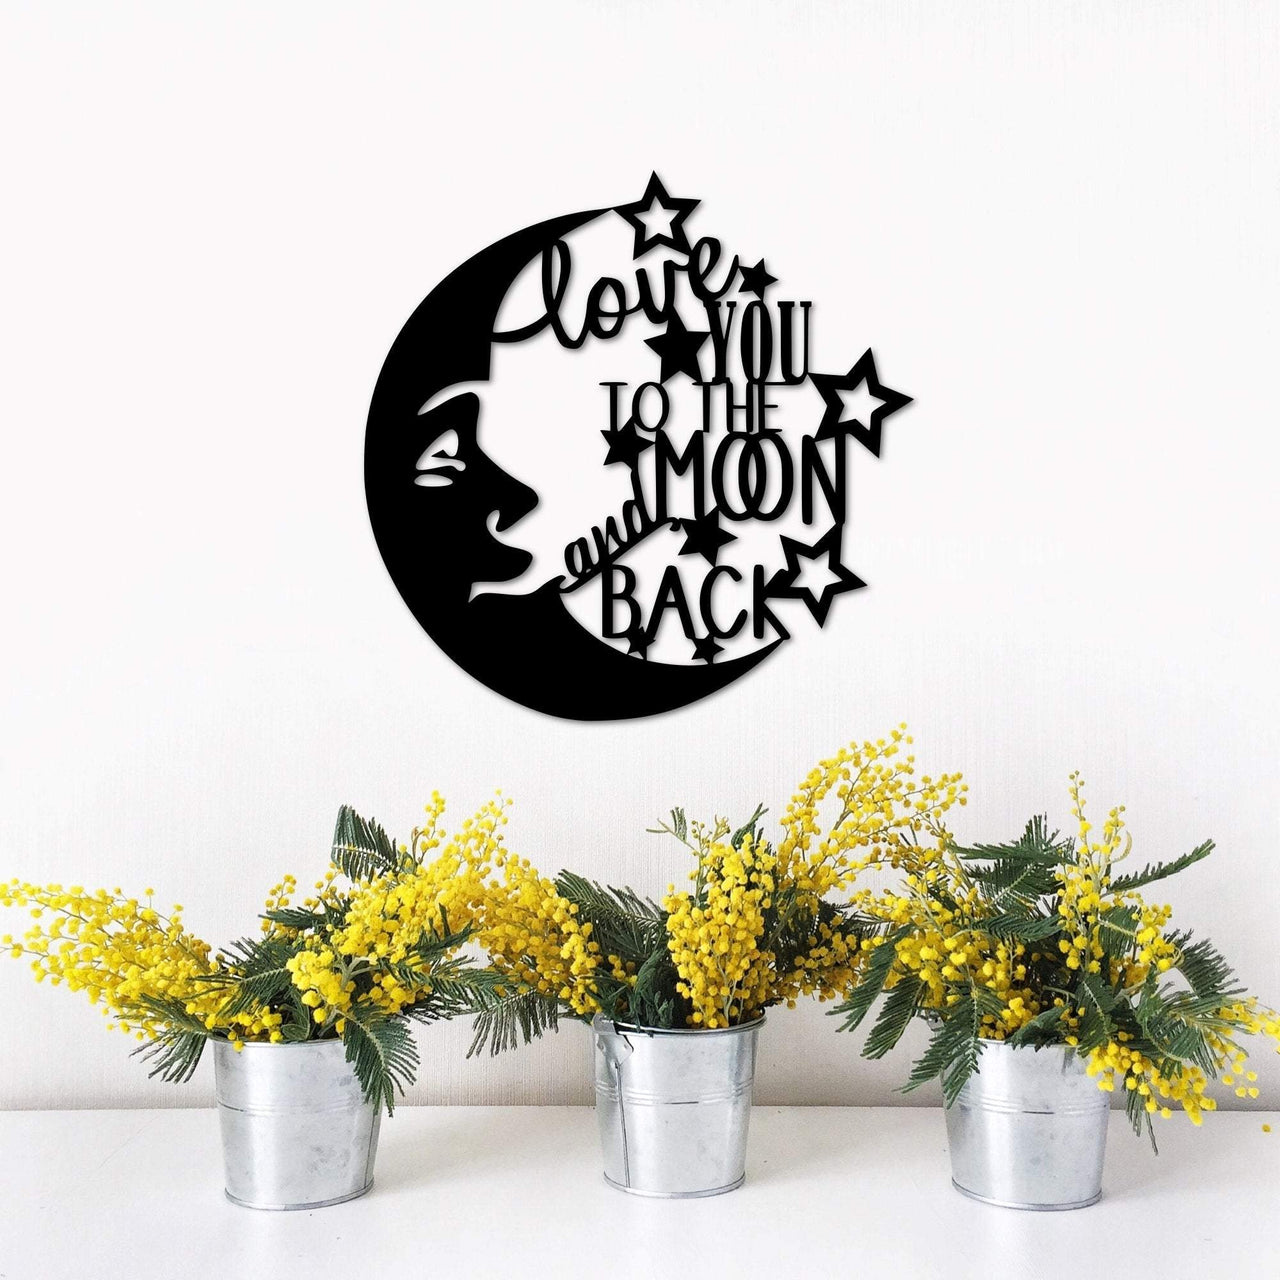 Love You to the Moon and Back Metal Sign | Metal Wall Art | Baby Room Nursery Decor | Kids Room Moon Star Art | Gift Idea for Kids